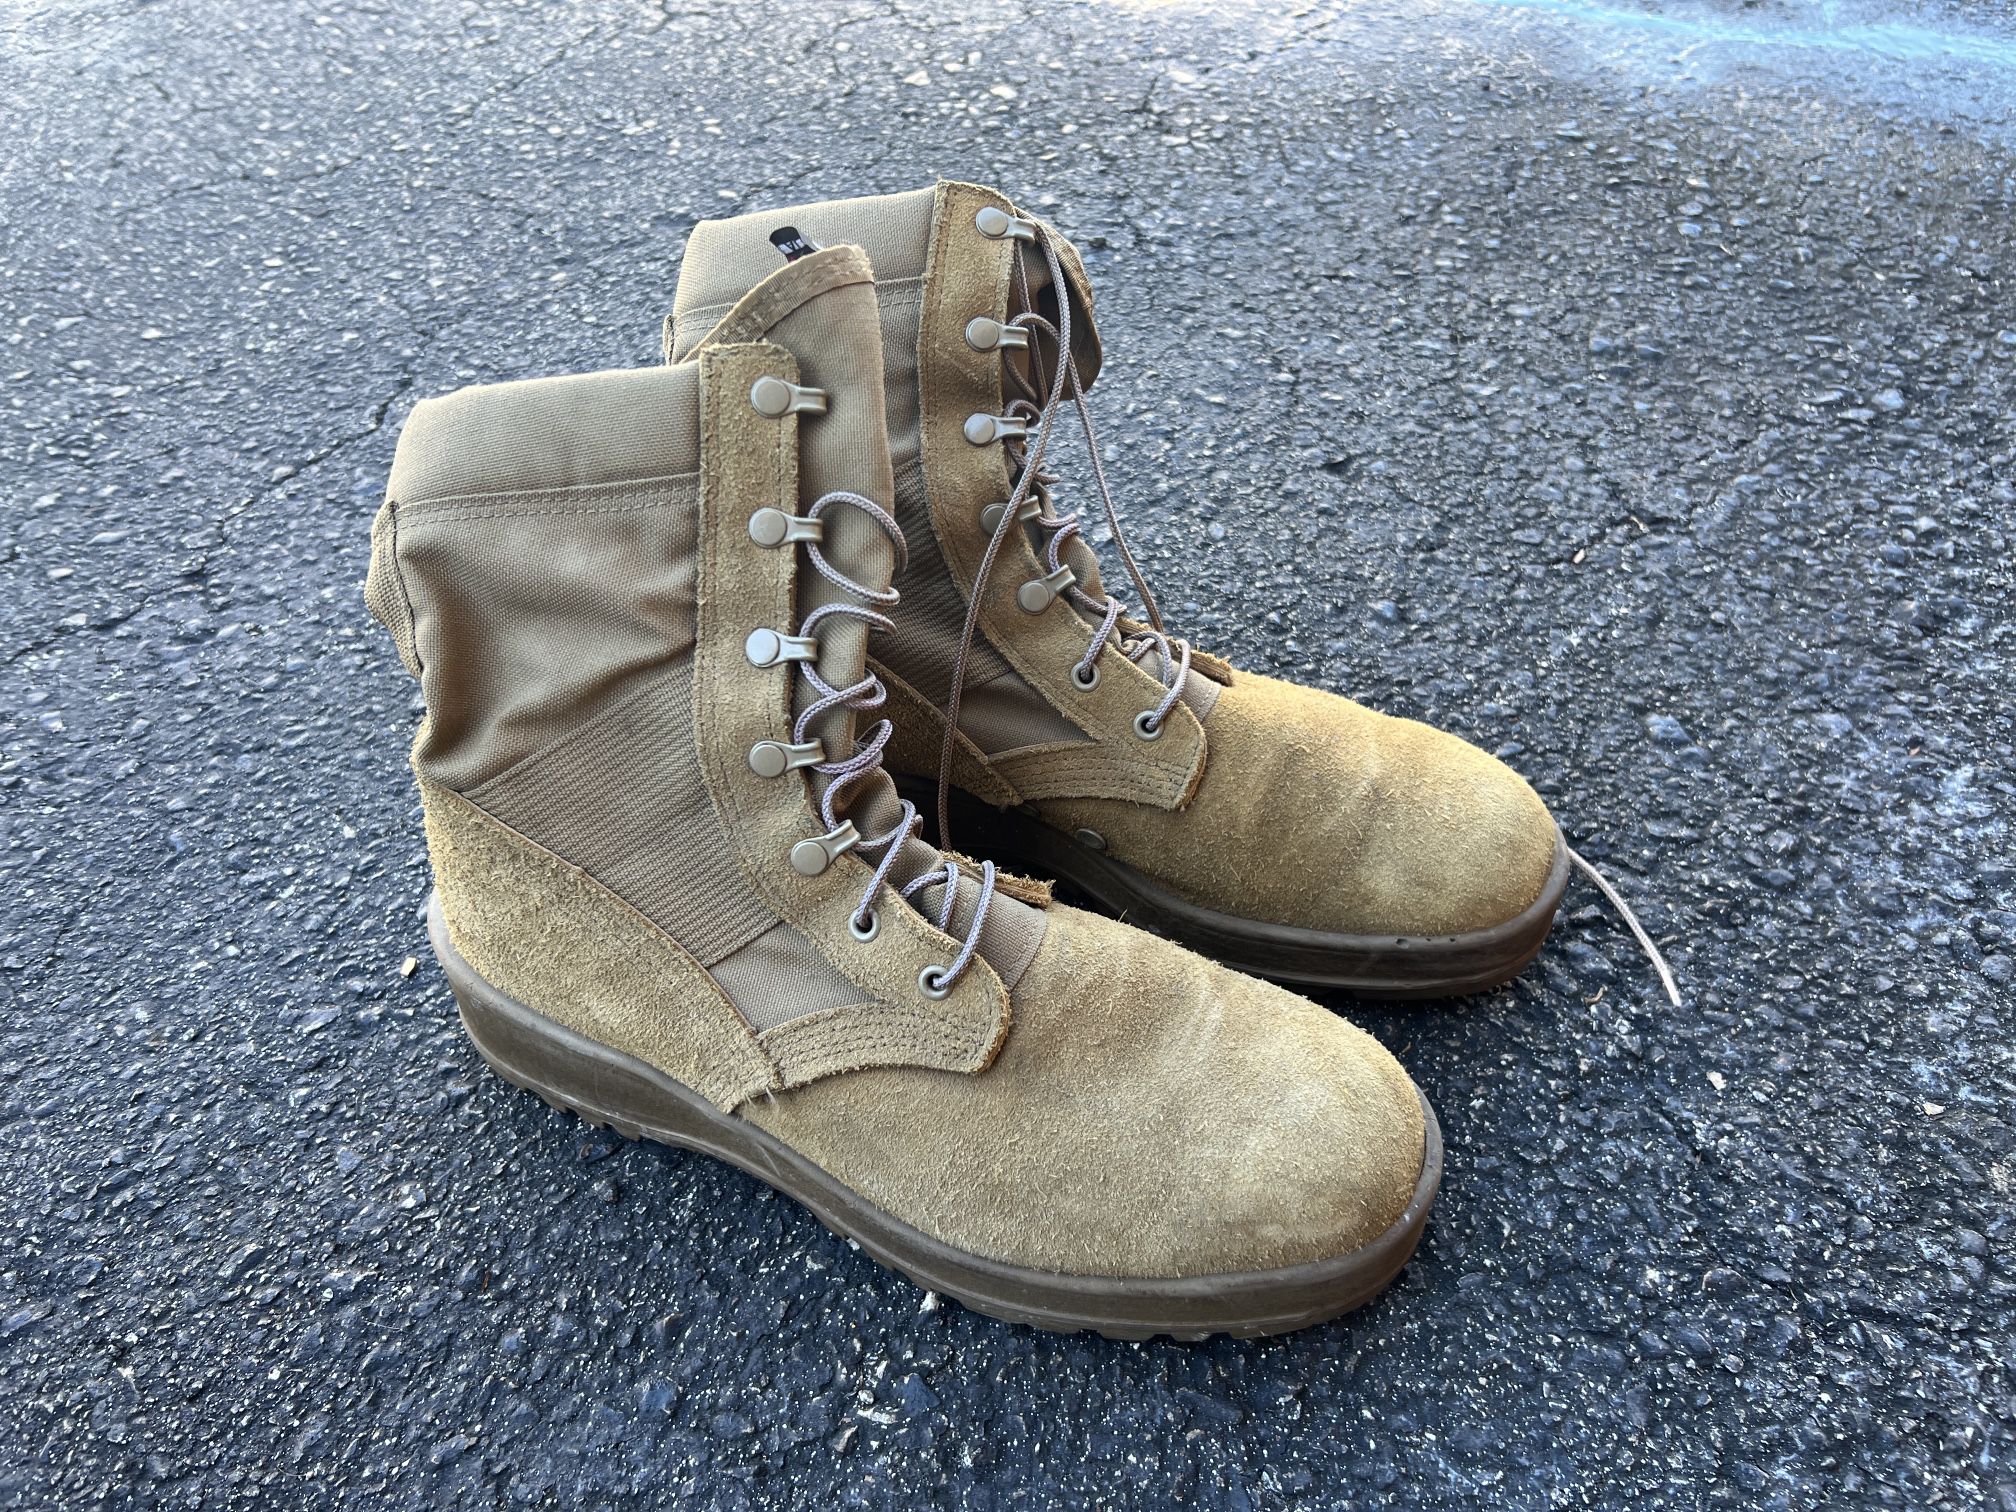 $25 Military Boots 